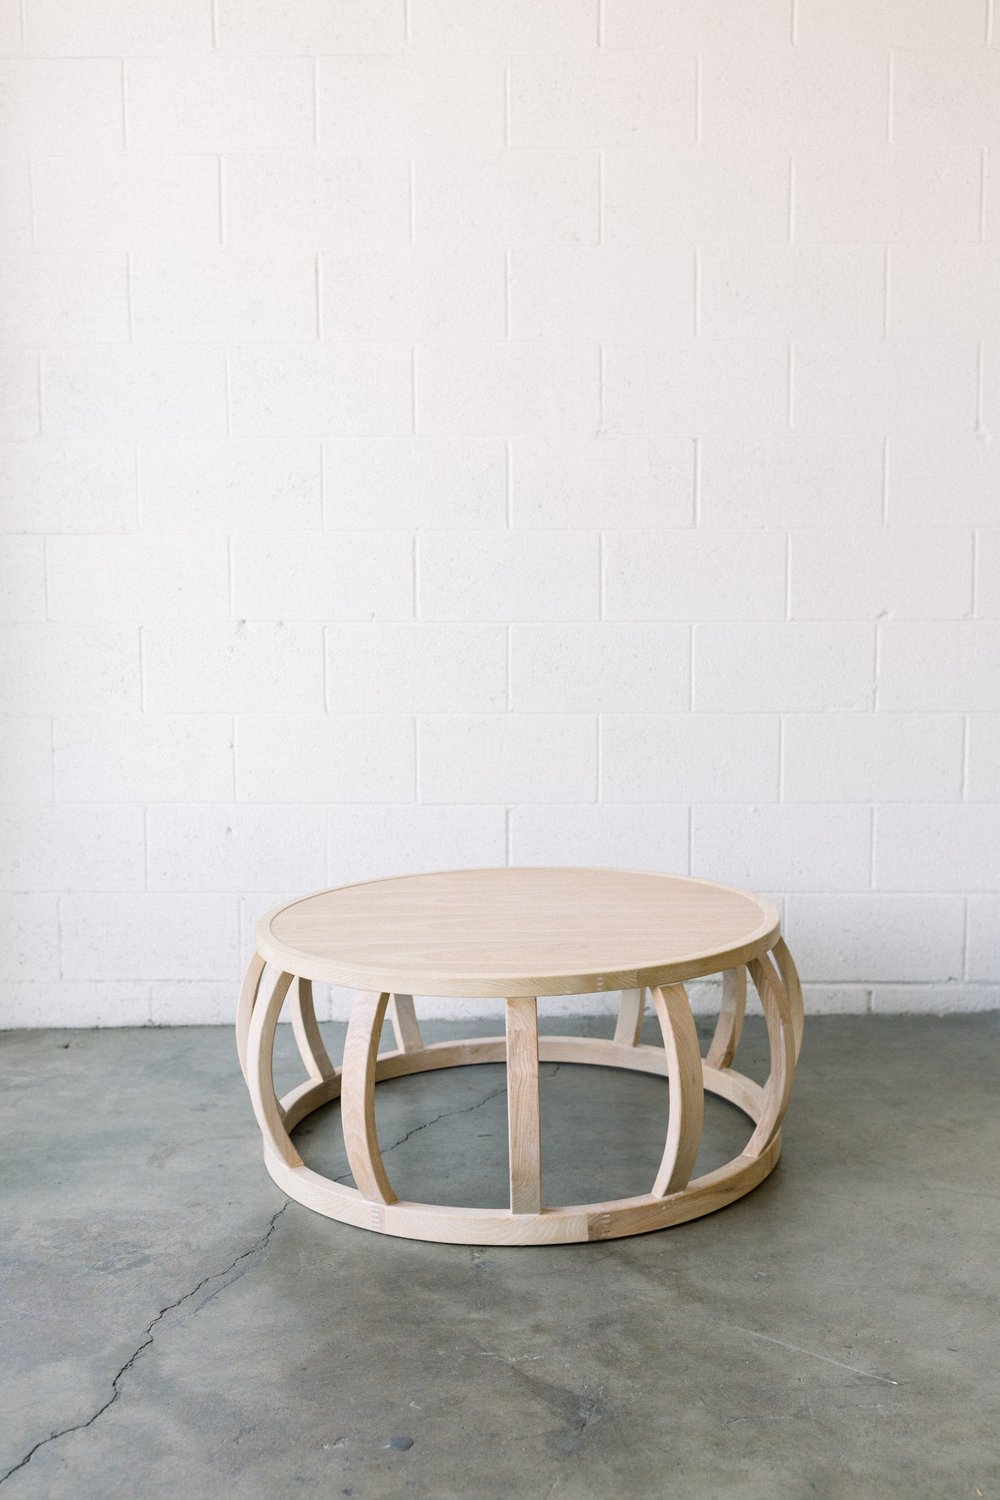 Carver Round Coffee Table 1 - Provenance Vintage Specialty Rentals Near Me Los Angeles Oak Wood Coffee Table Rental Wedding Rentals Event Rentals Luxury Event Rentals Party Rentals Near Me Prop House Prop Rentals Near Me Los Angeles.jpg